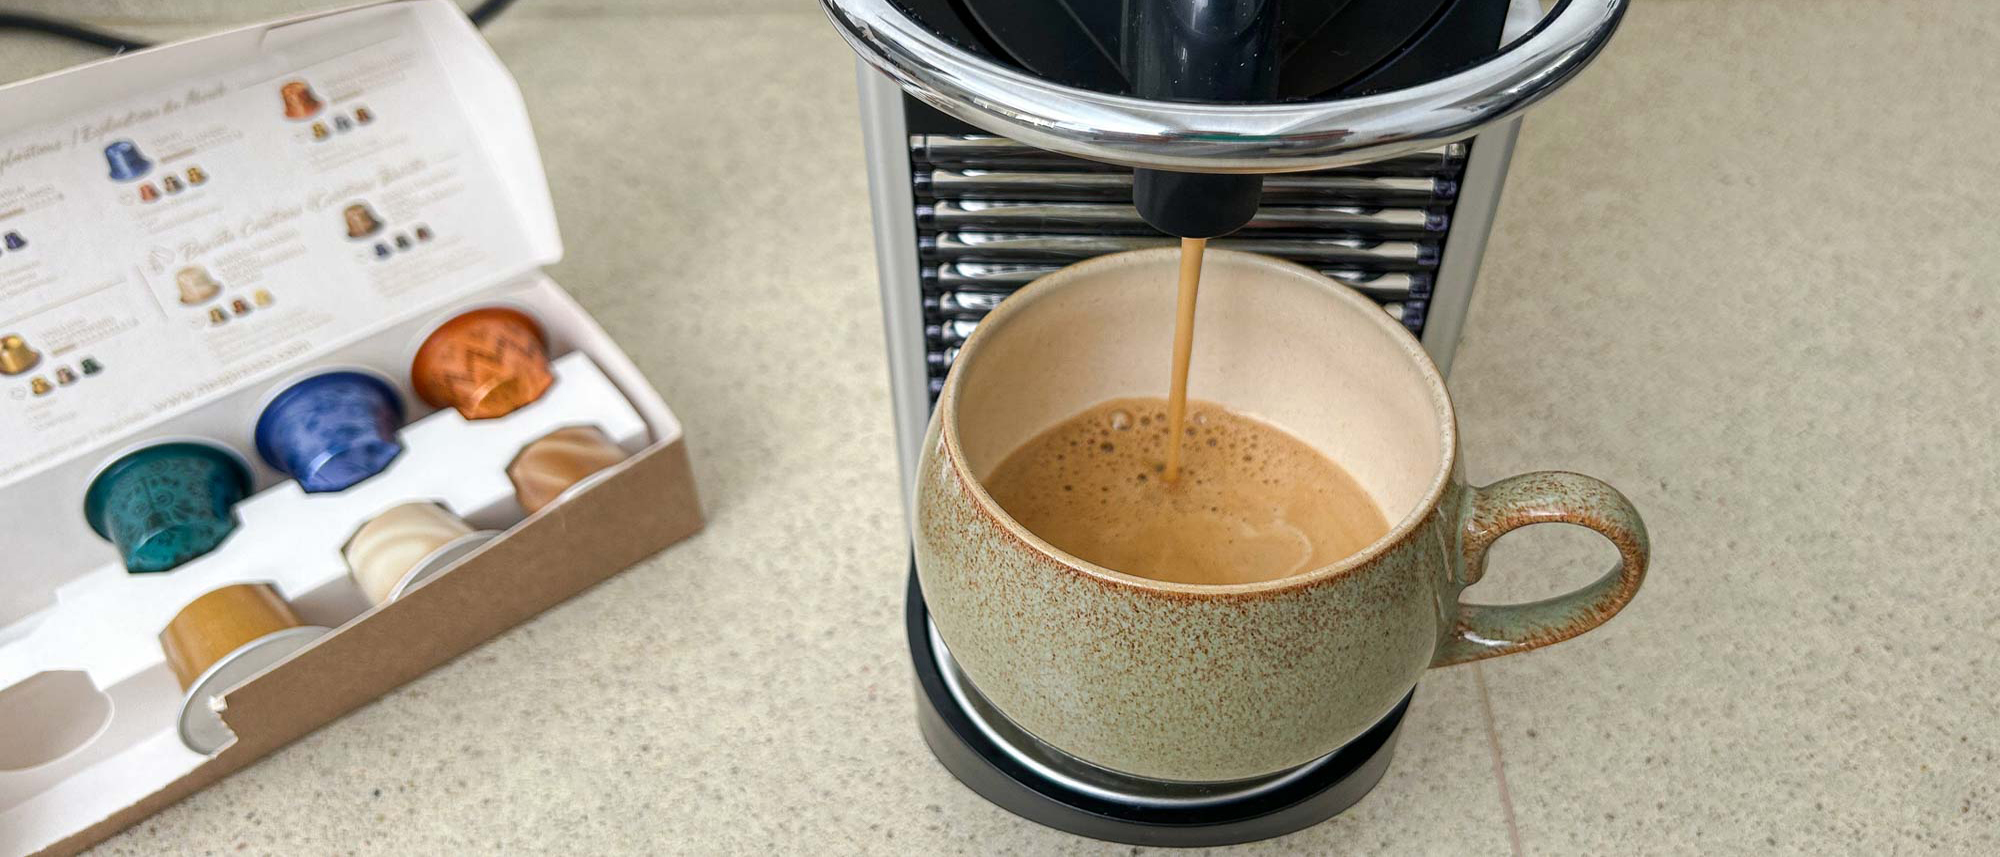 We review the Nespresso Pixie - Pod coffee for the masses